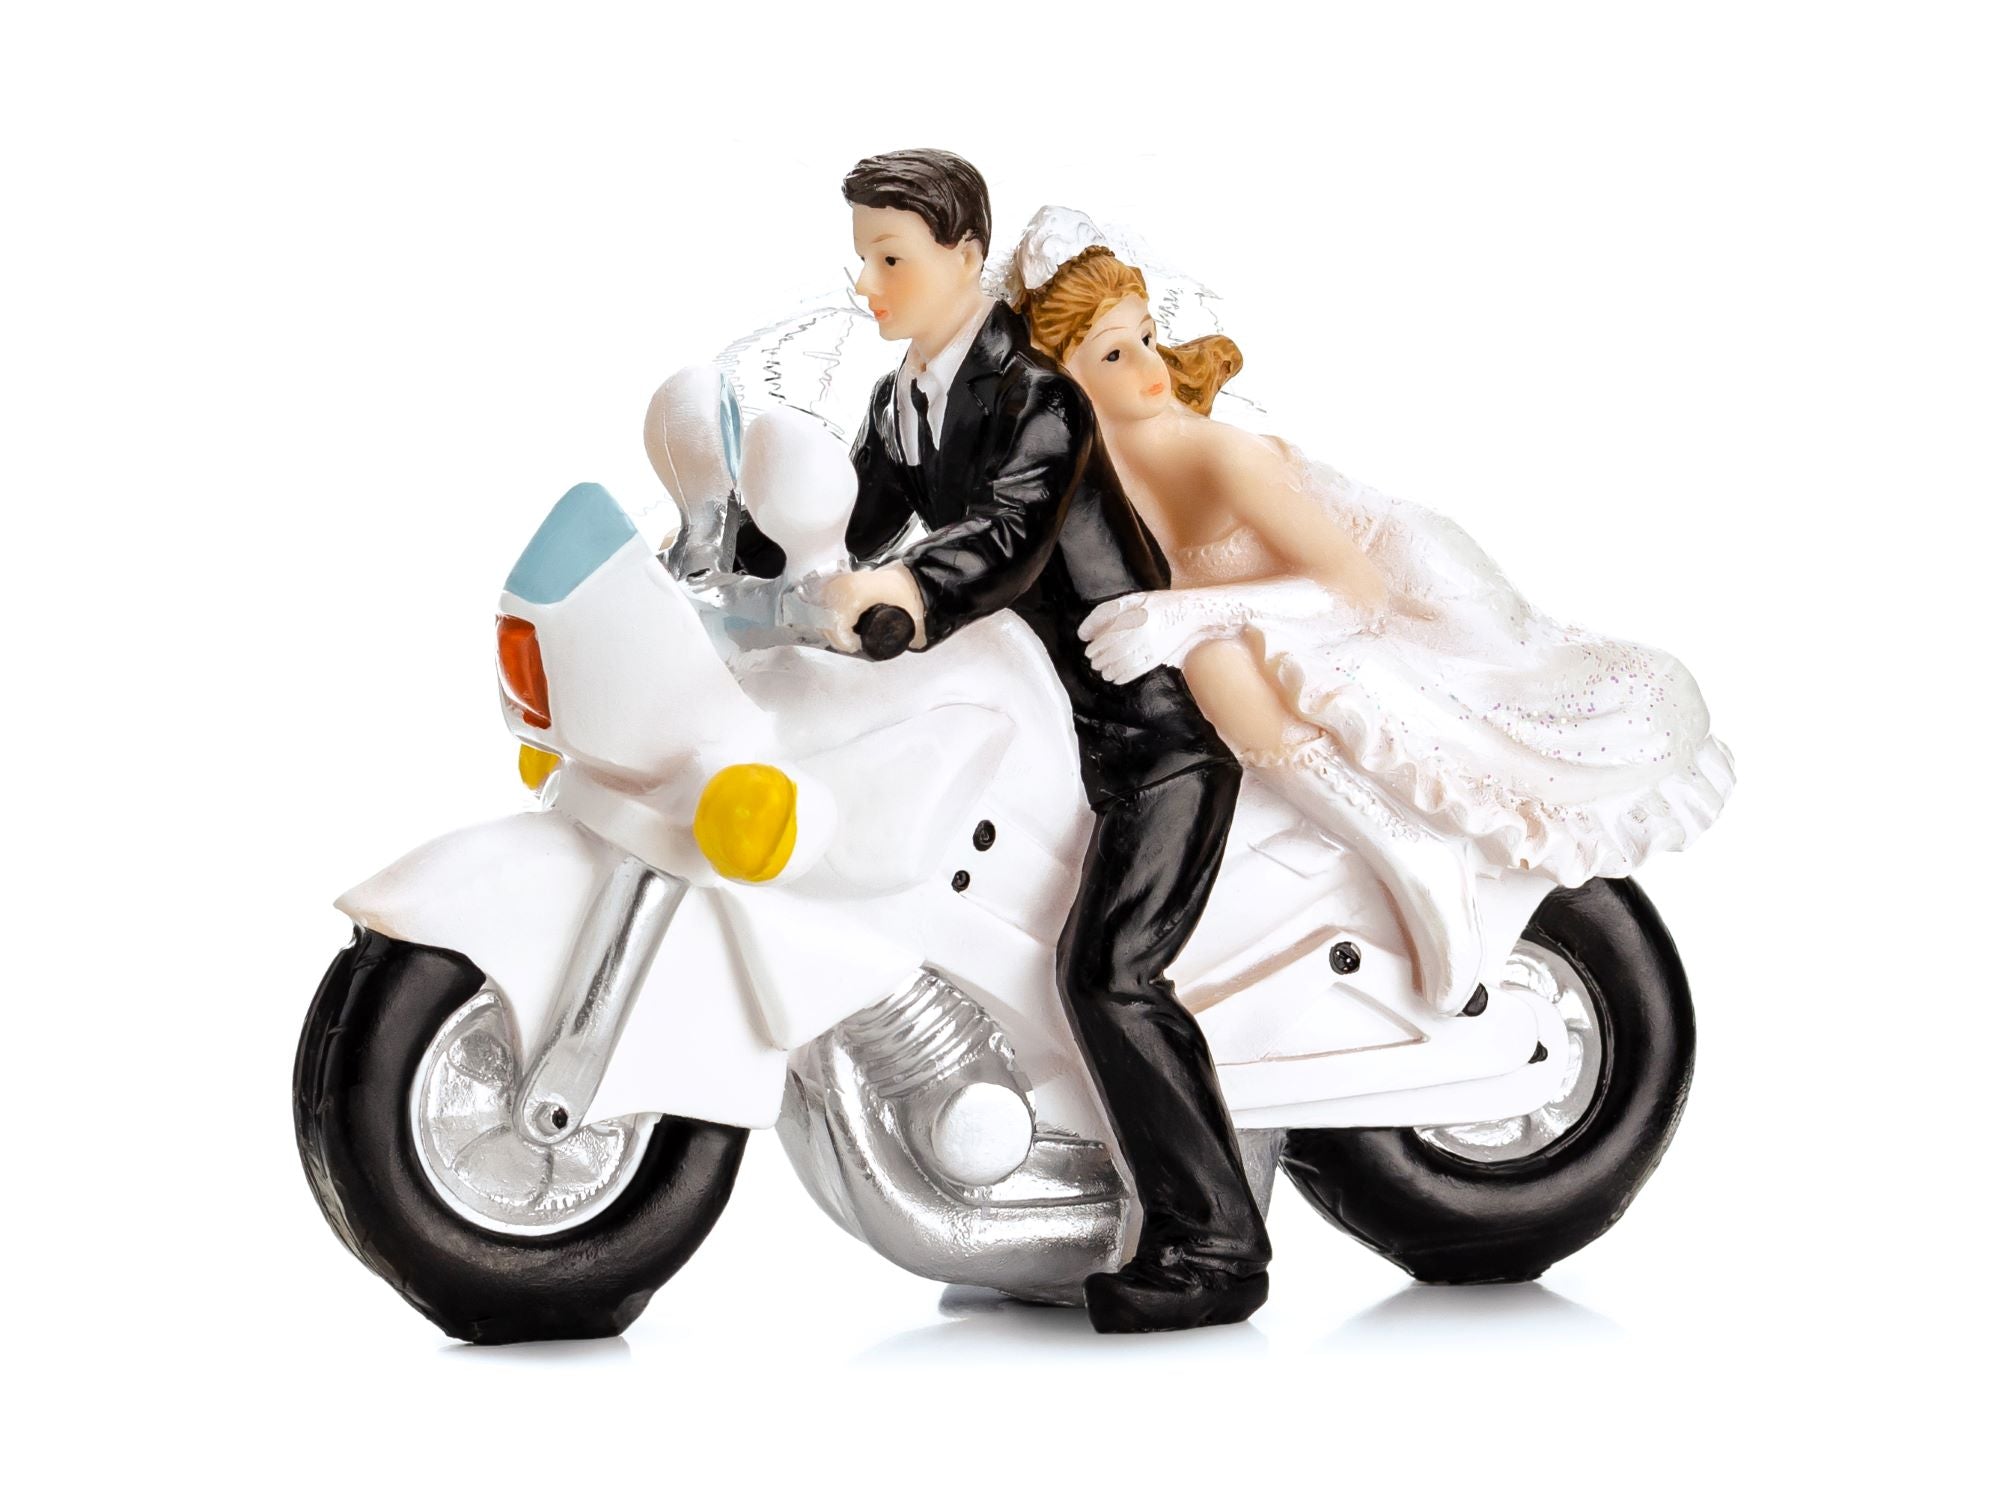 Figurine Newly-weds on a Motorcycle Wedding Cake Topper